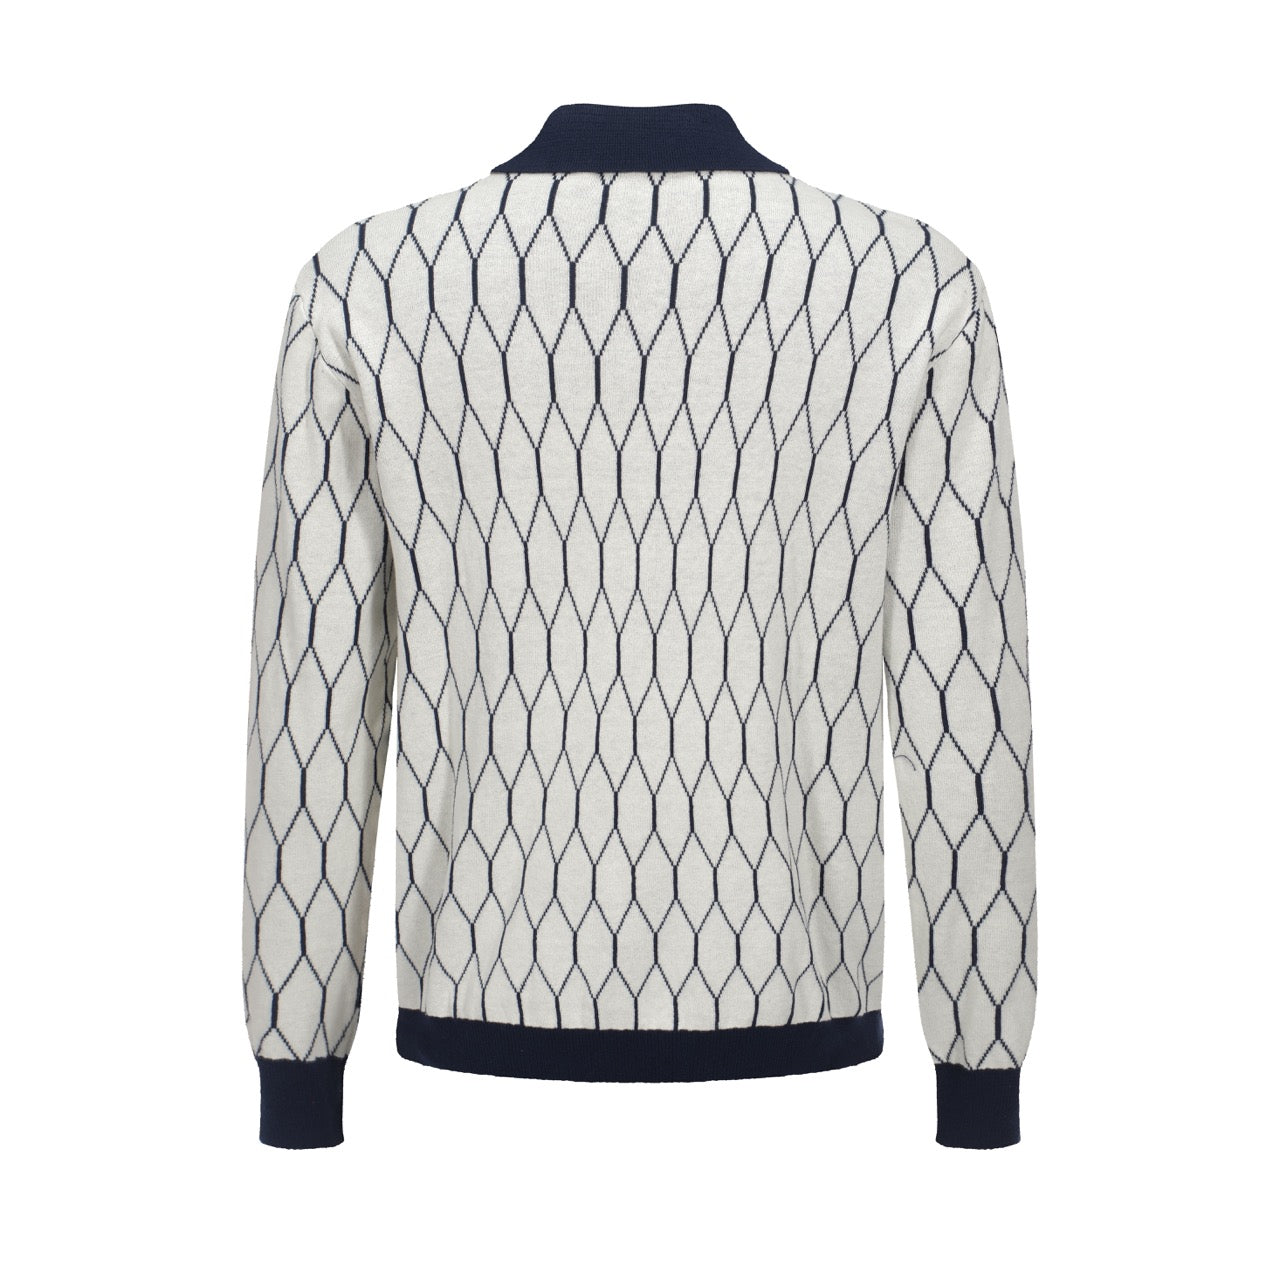 Men's Navy Blue Knitted Wear With Geometric Pattern Long Sleeves Knit Fashion